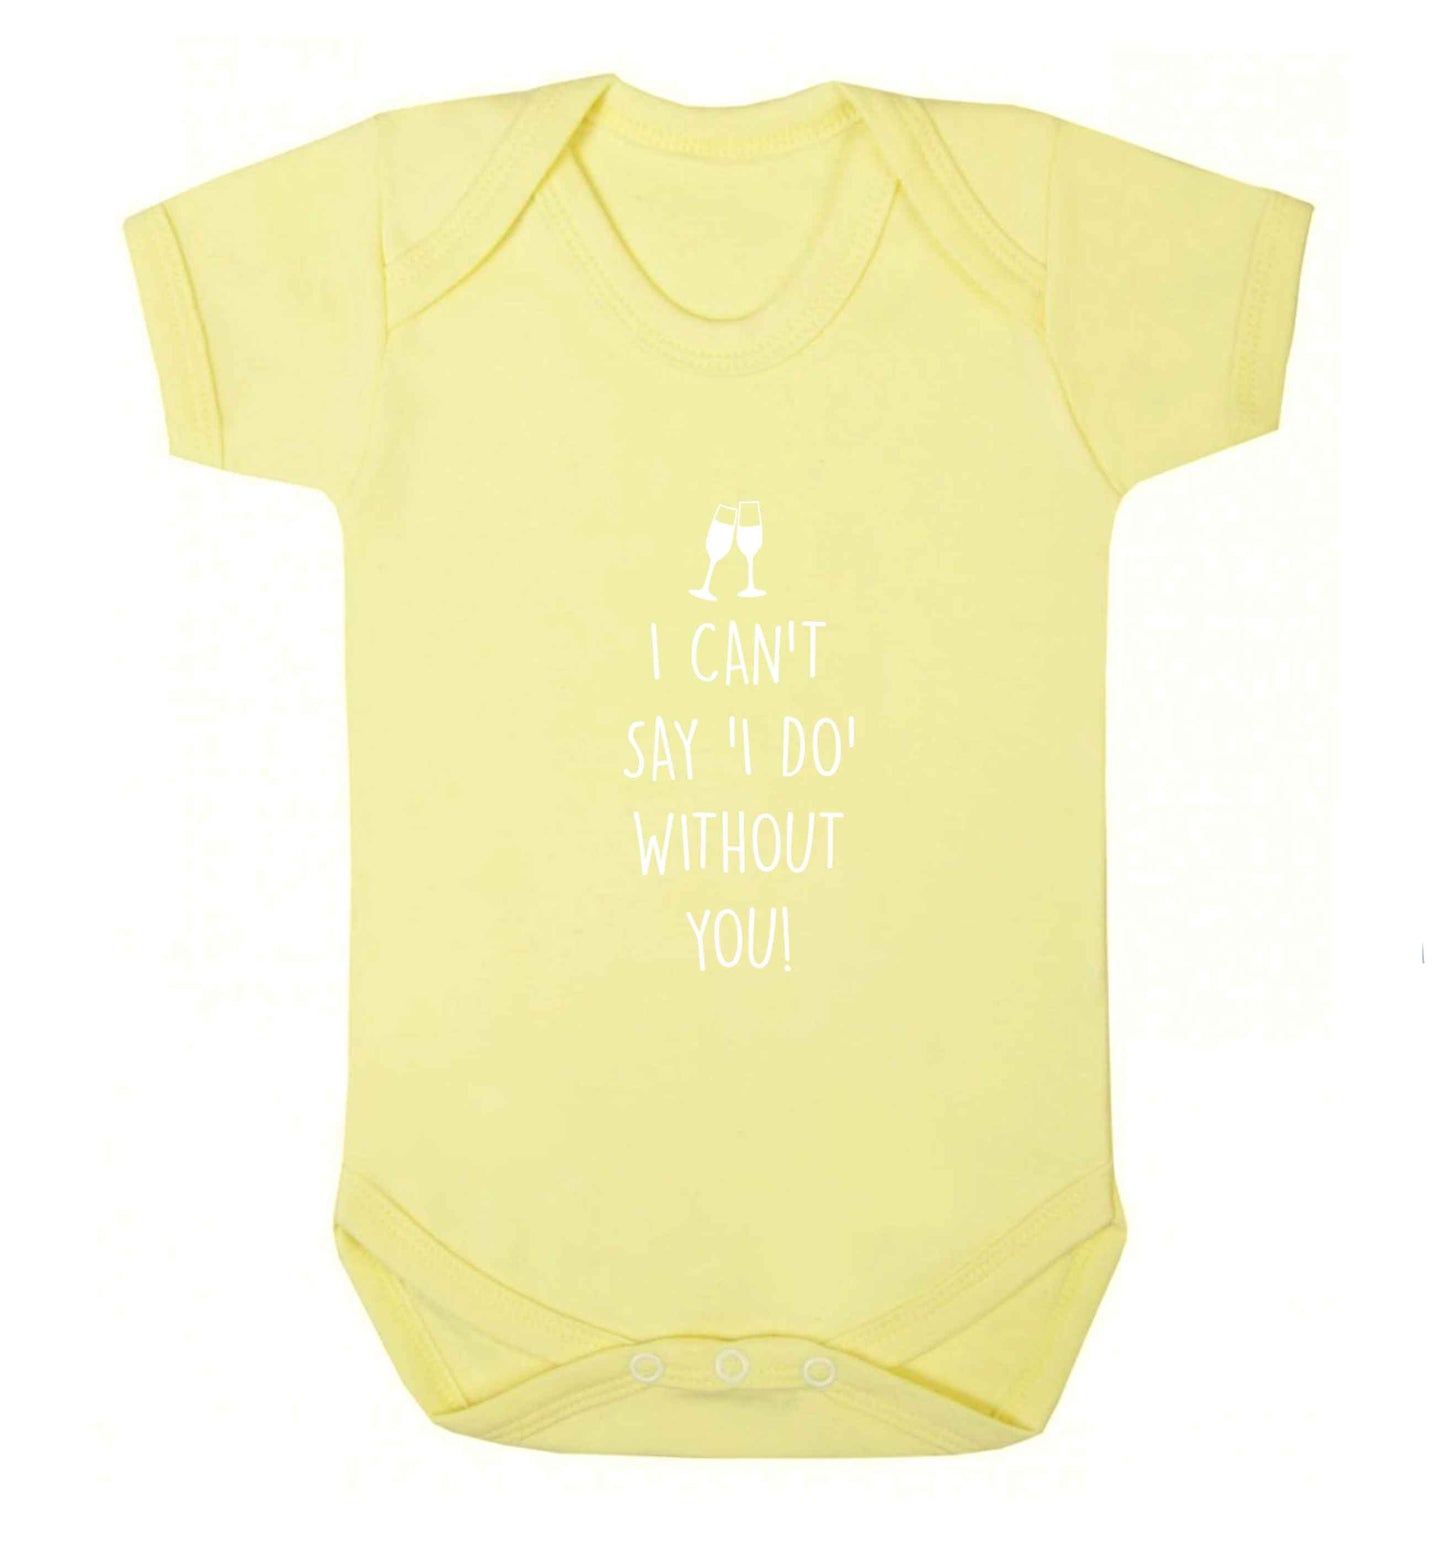 I can't say 'I do' without you! baby vest pale yellow 18-24 months